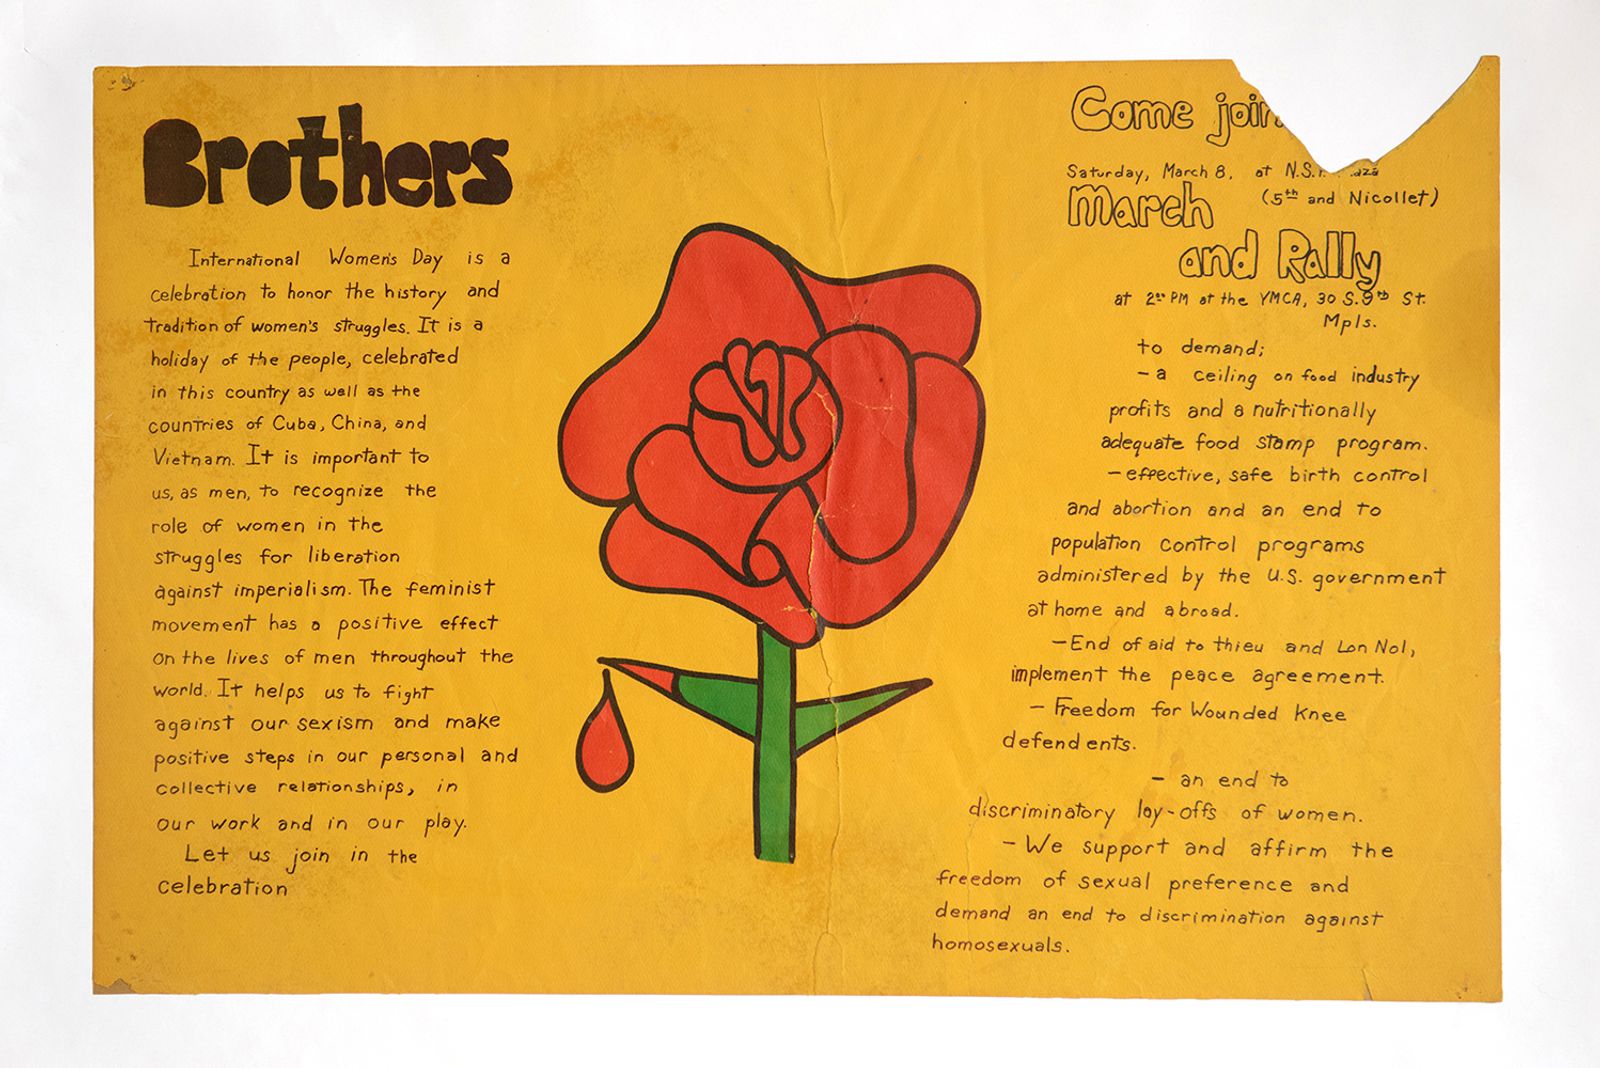 © Alice Proujansky - A 1975 poster for International Women's Day photographed by me. My dad wrote the text on the left.